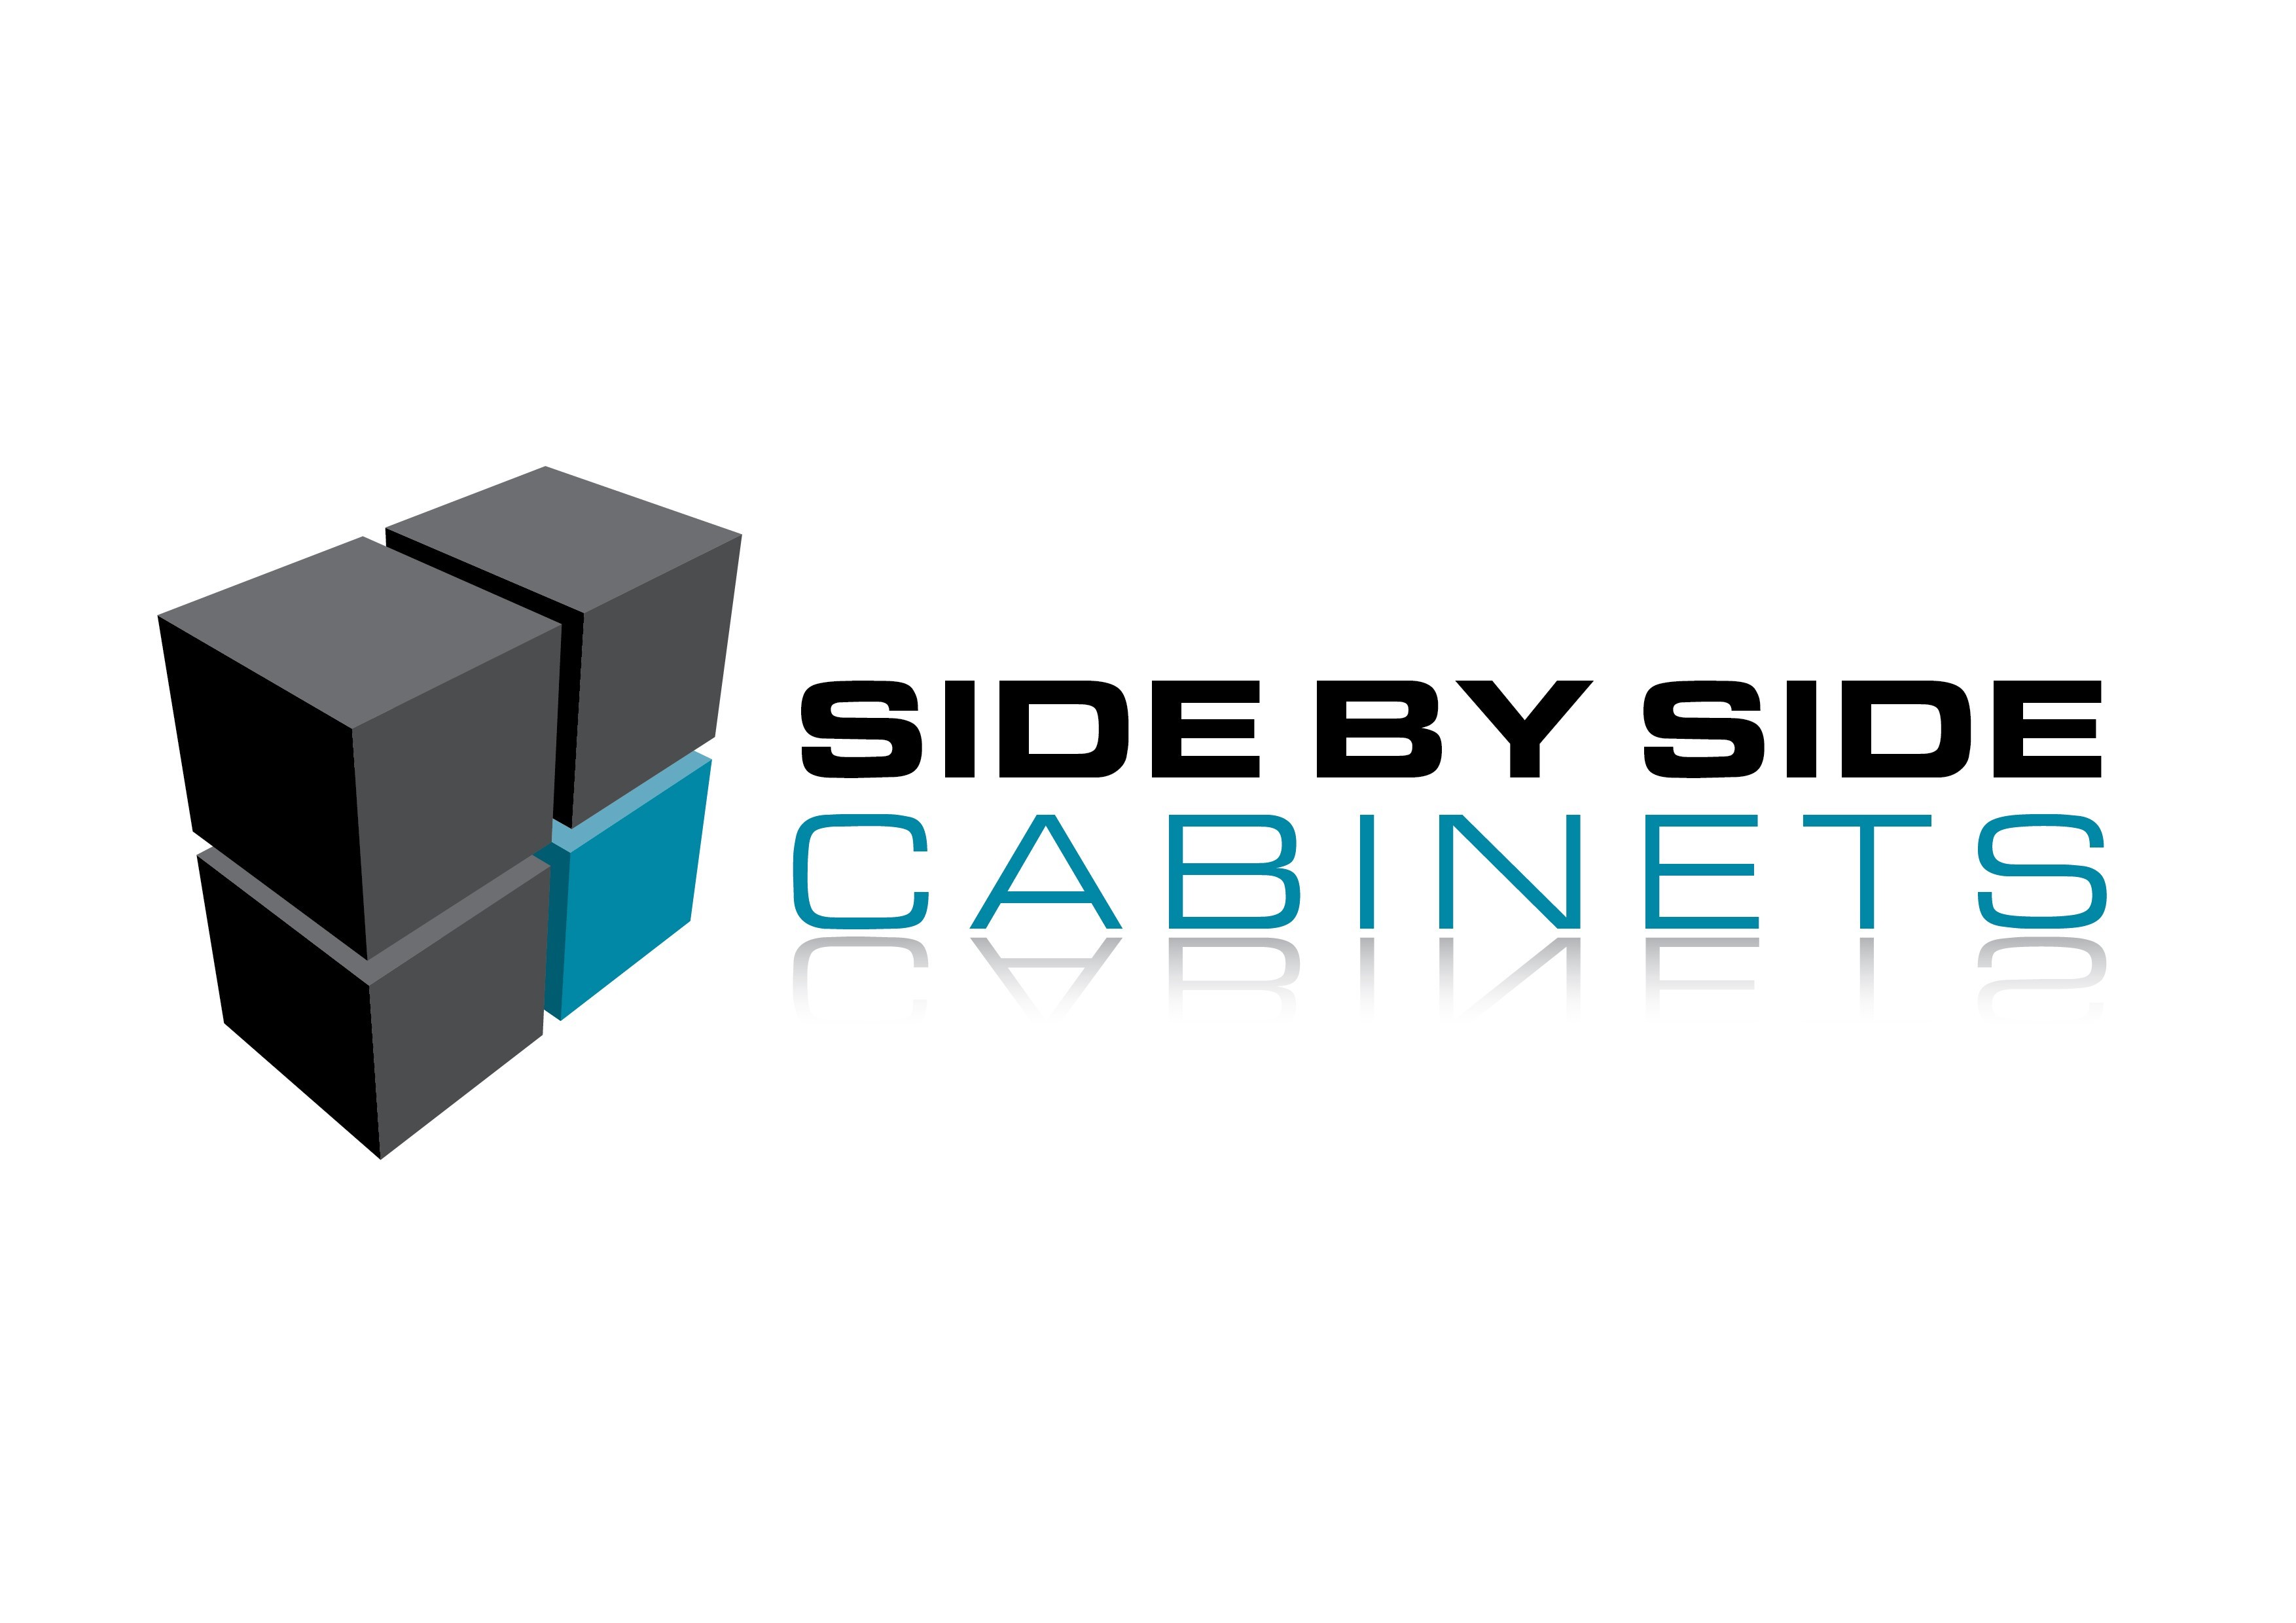 SIDE BY SIDE CABINETS Company Logo by SIDE BY SIDE CABINETS in Clarkson WA